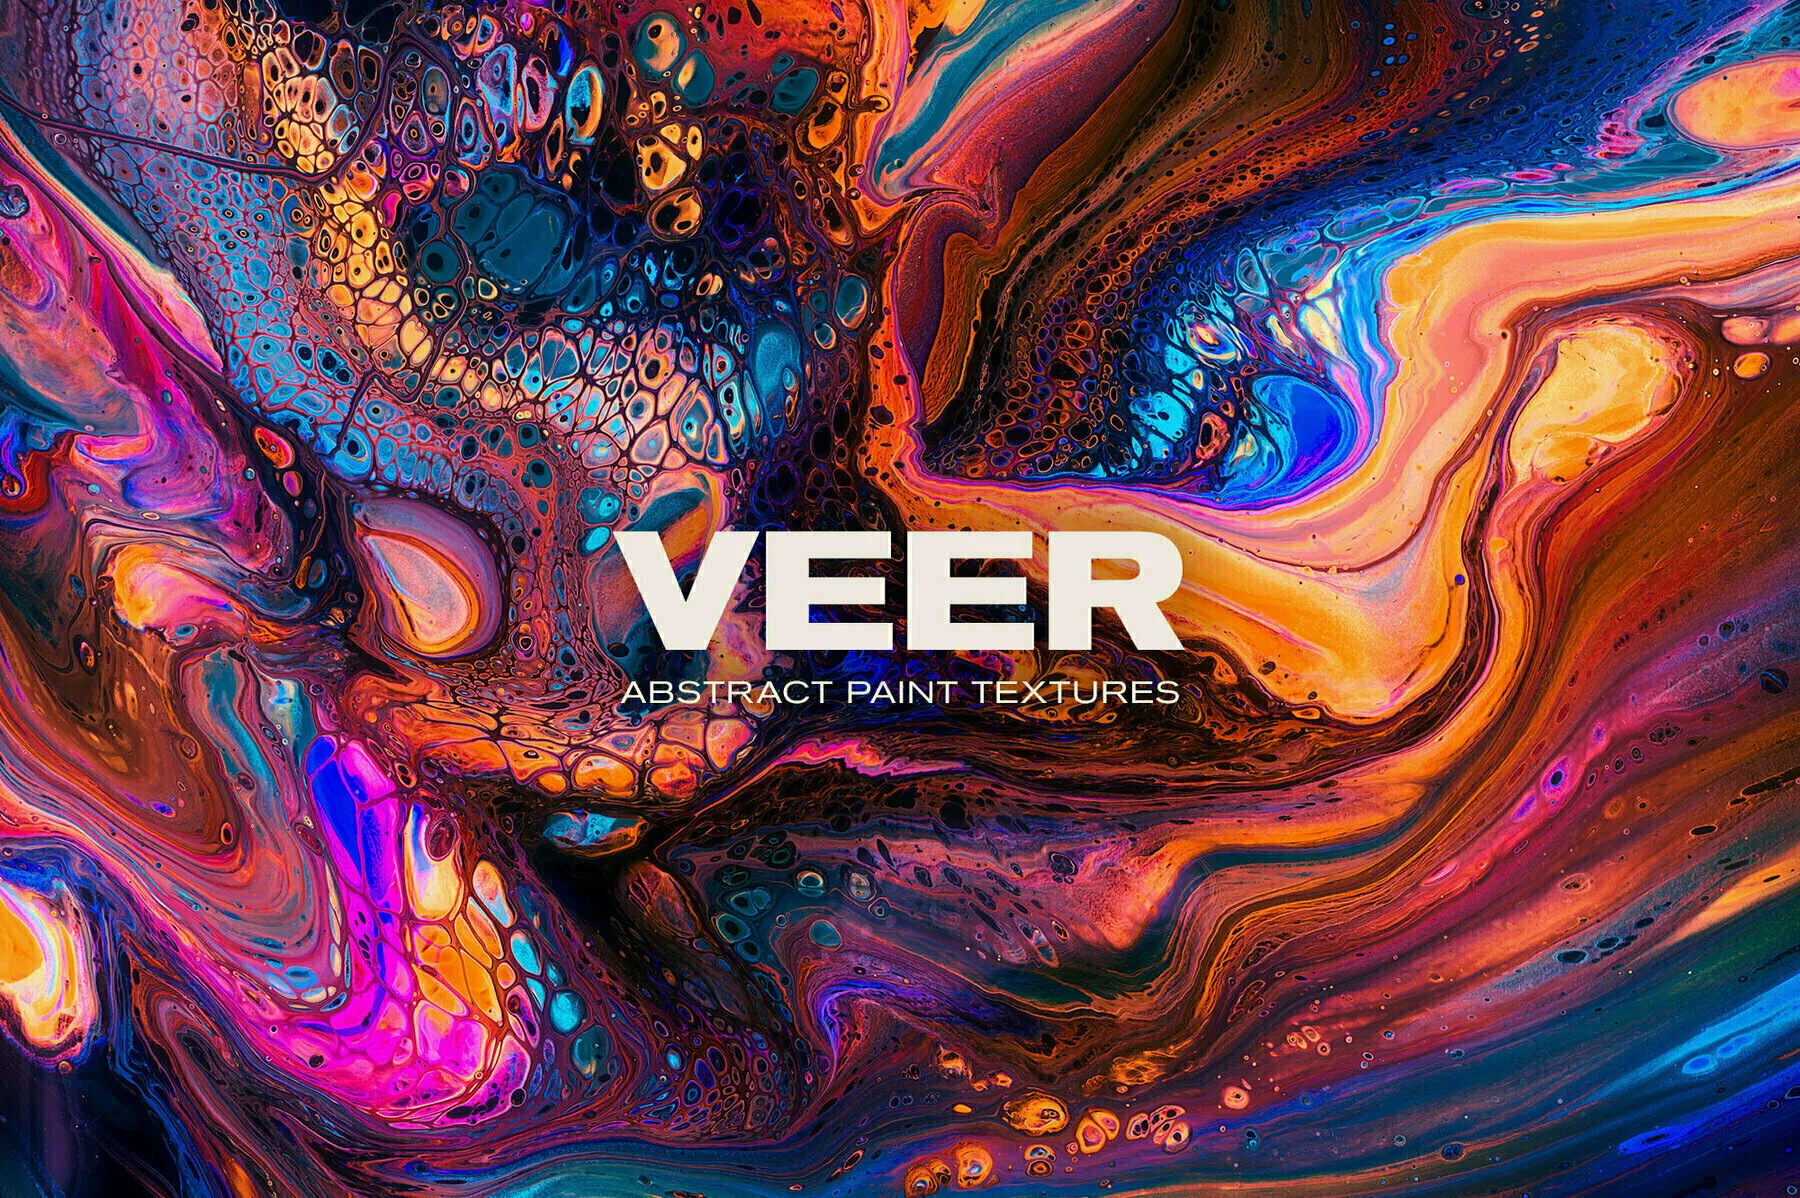 Veer – Abstract Paint Textures